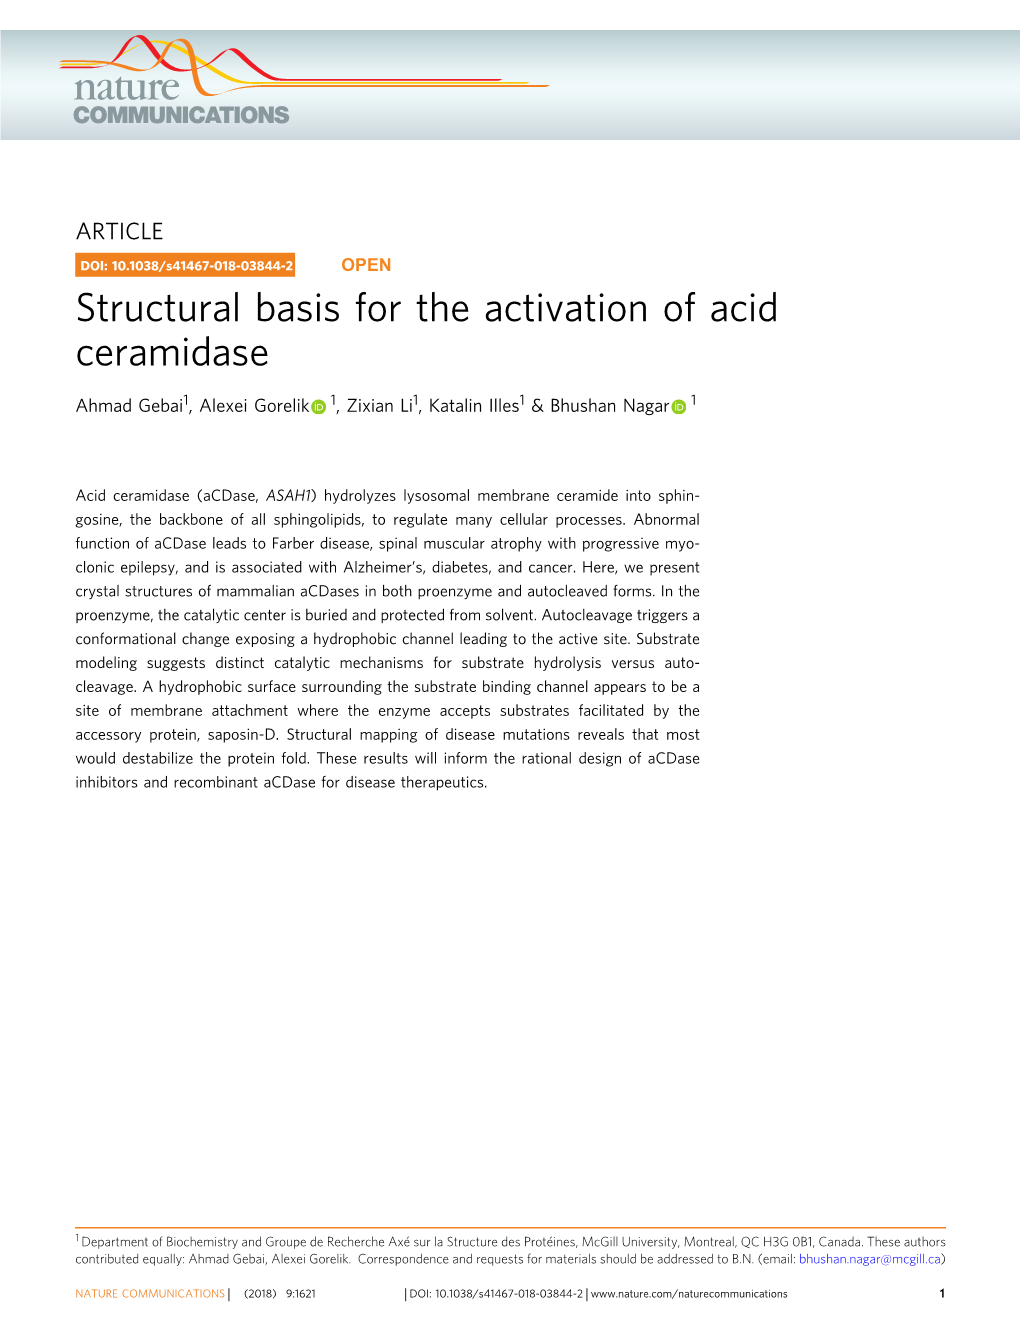 Structural Basis for the Activation of Acid Ceramidase